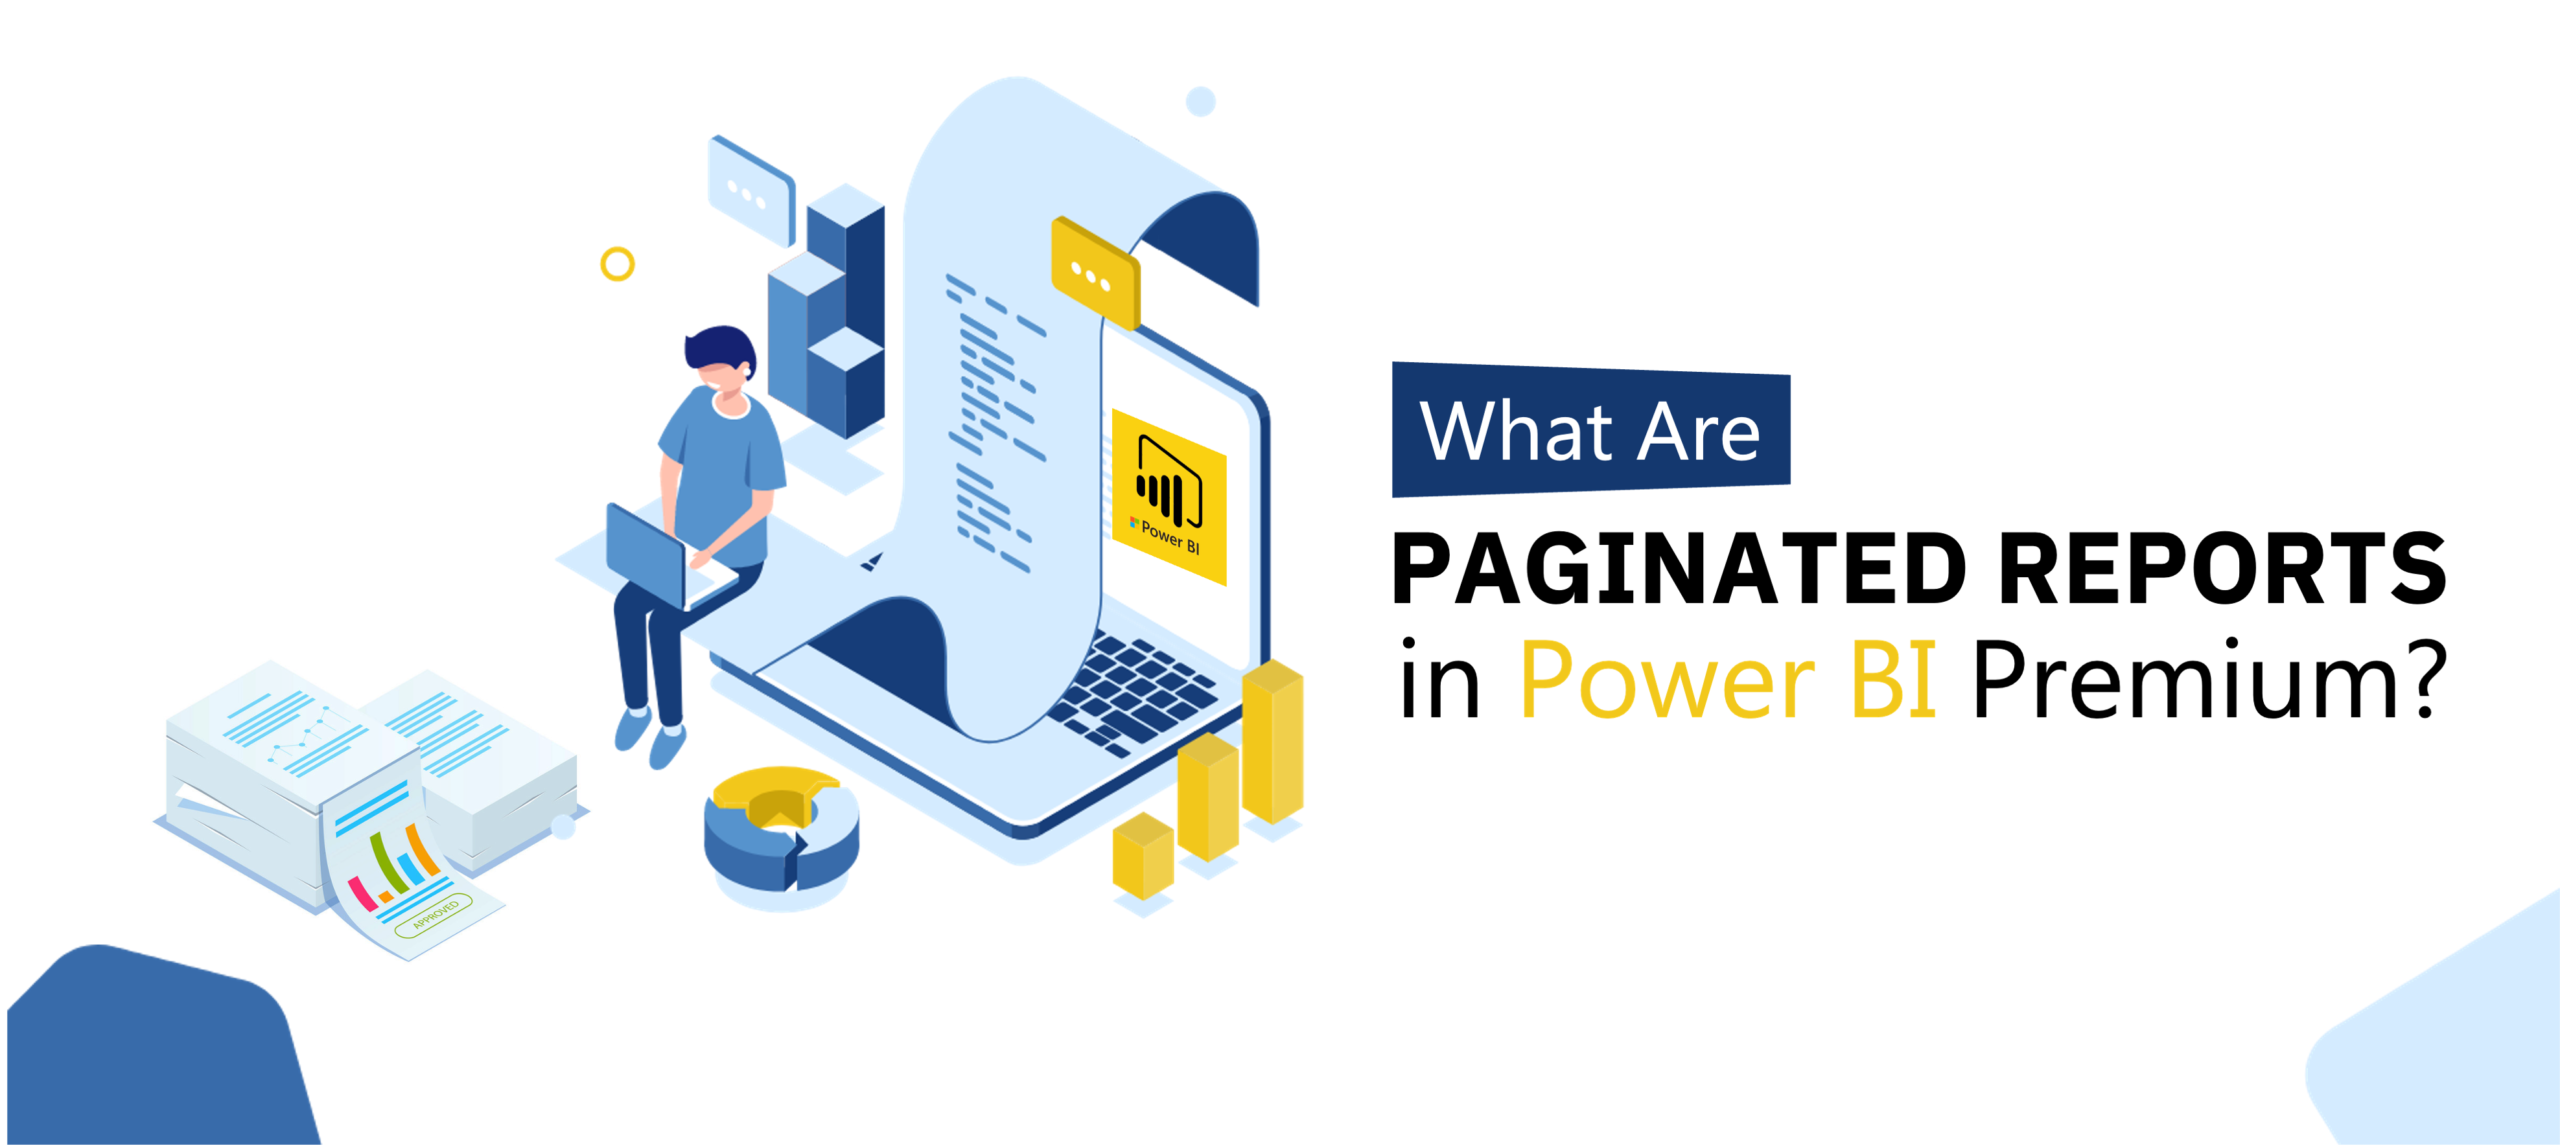 What Are Paginated Reports in Power BI Premium?